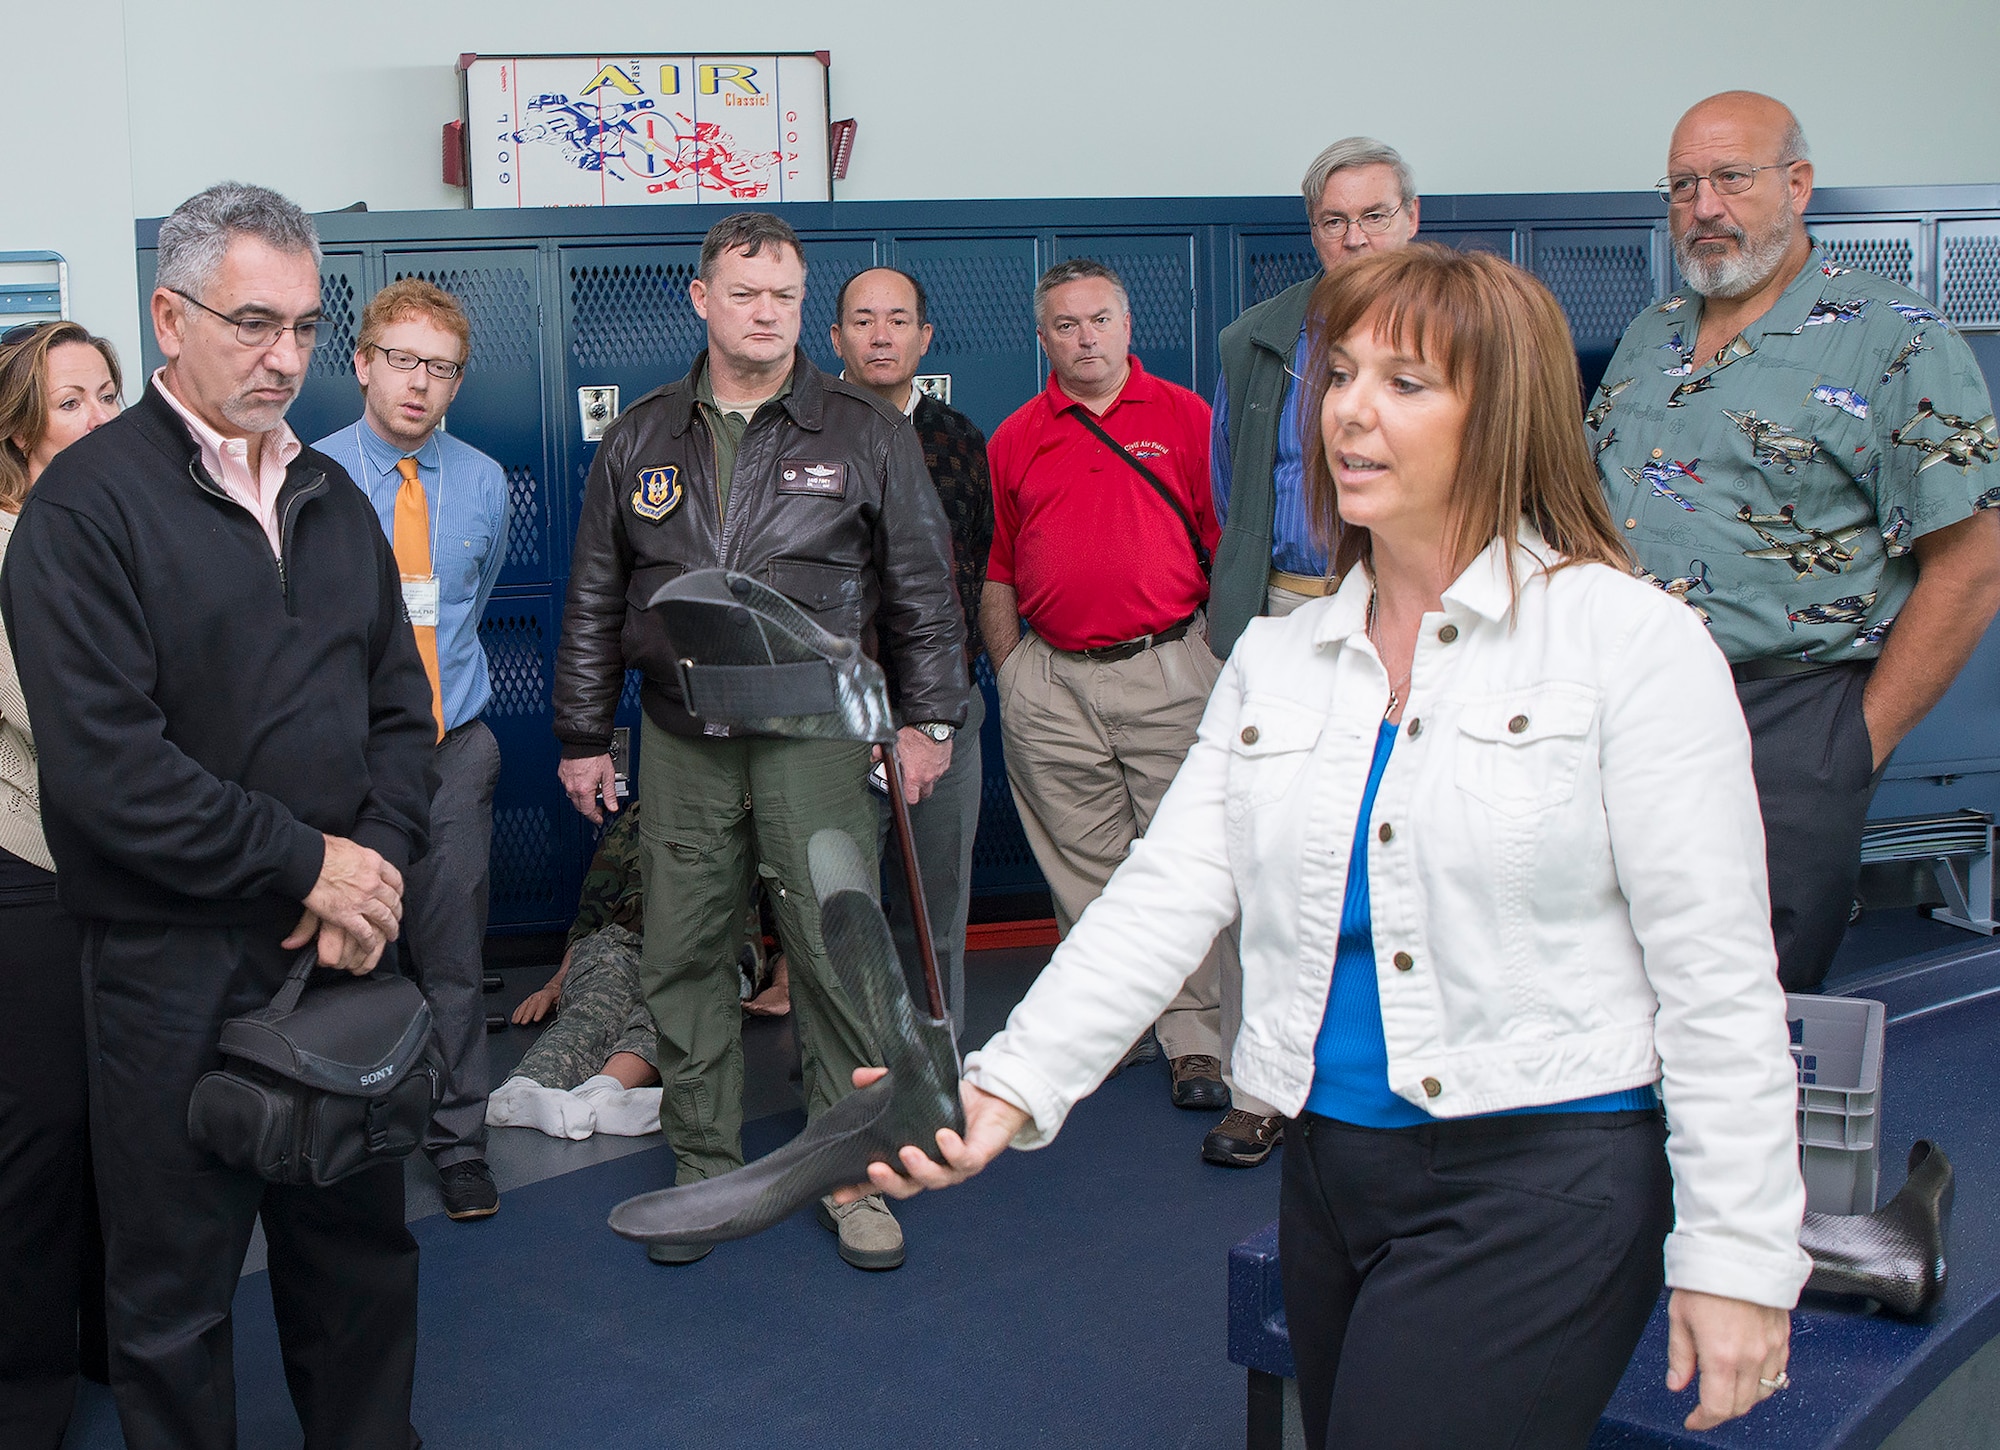 Lori Leal, Center for the Intrepid secretary, explains the capabilities of the Intrepid Dynamic Exoskeletal Orthosis to civic leaders from Joint Base McGuire-Dix-Lakehurst Nov. 30, 2016 at Joint Base San Antonio-Ft. Sam Houston, Texas. The civic leaders also toured a C-5M Super Galaxy aircraft, the Medical Training and Education Campus at Joint Base San Antonio-Ft. Sam Houston. (U.S. Air Force photo by Benjamin Faske)